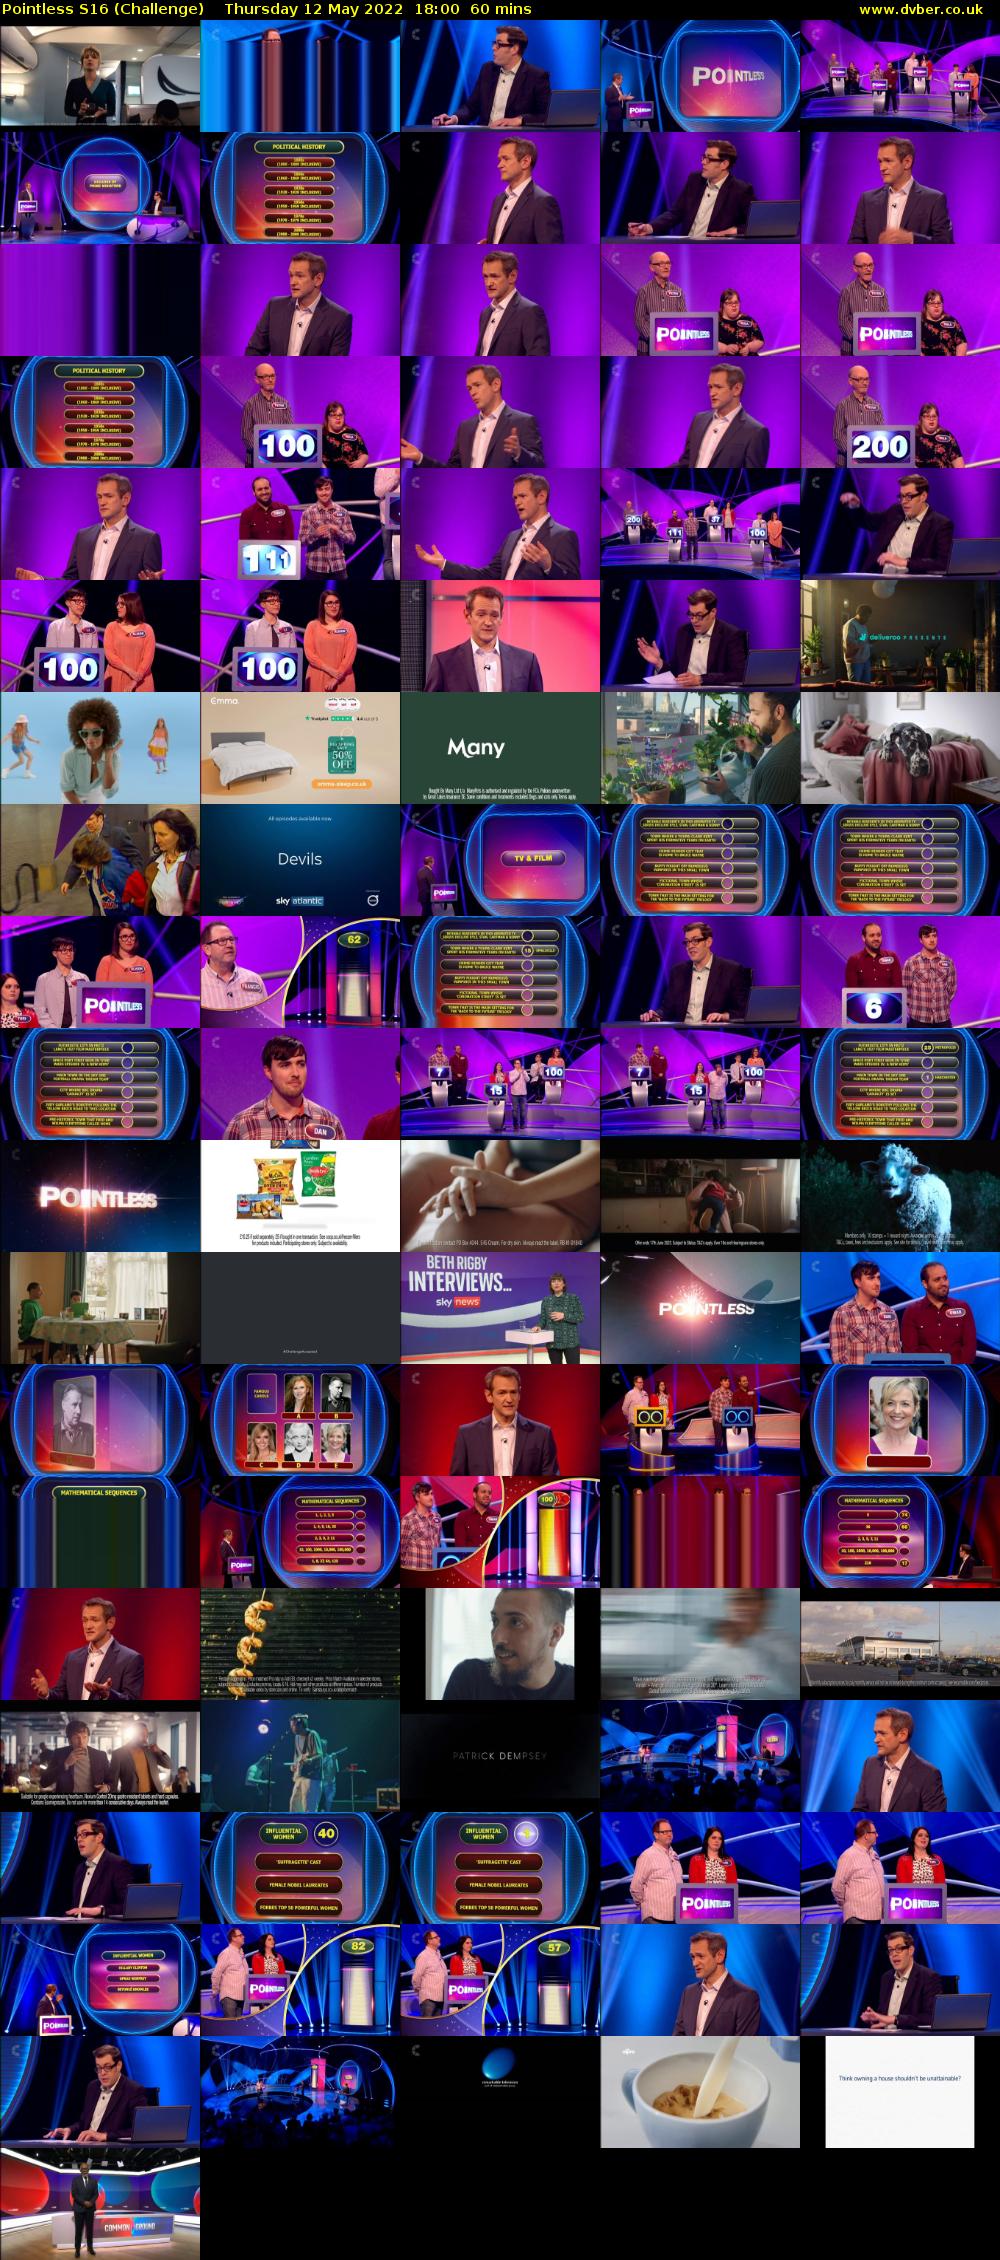 Pointless S16 (Challenge) Thursday 12 May 2022 18:00 - 19:00